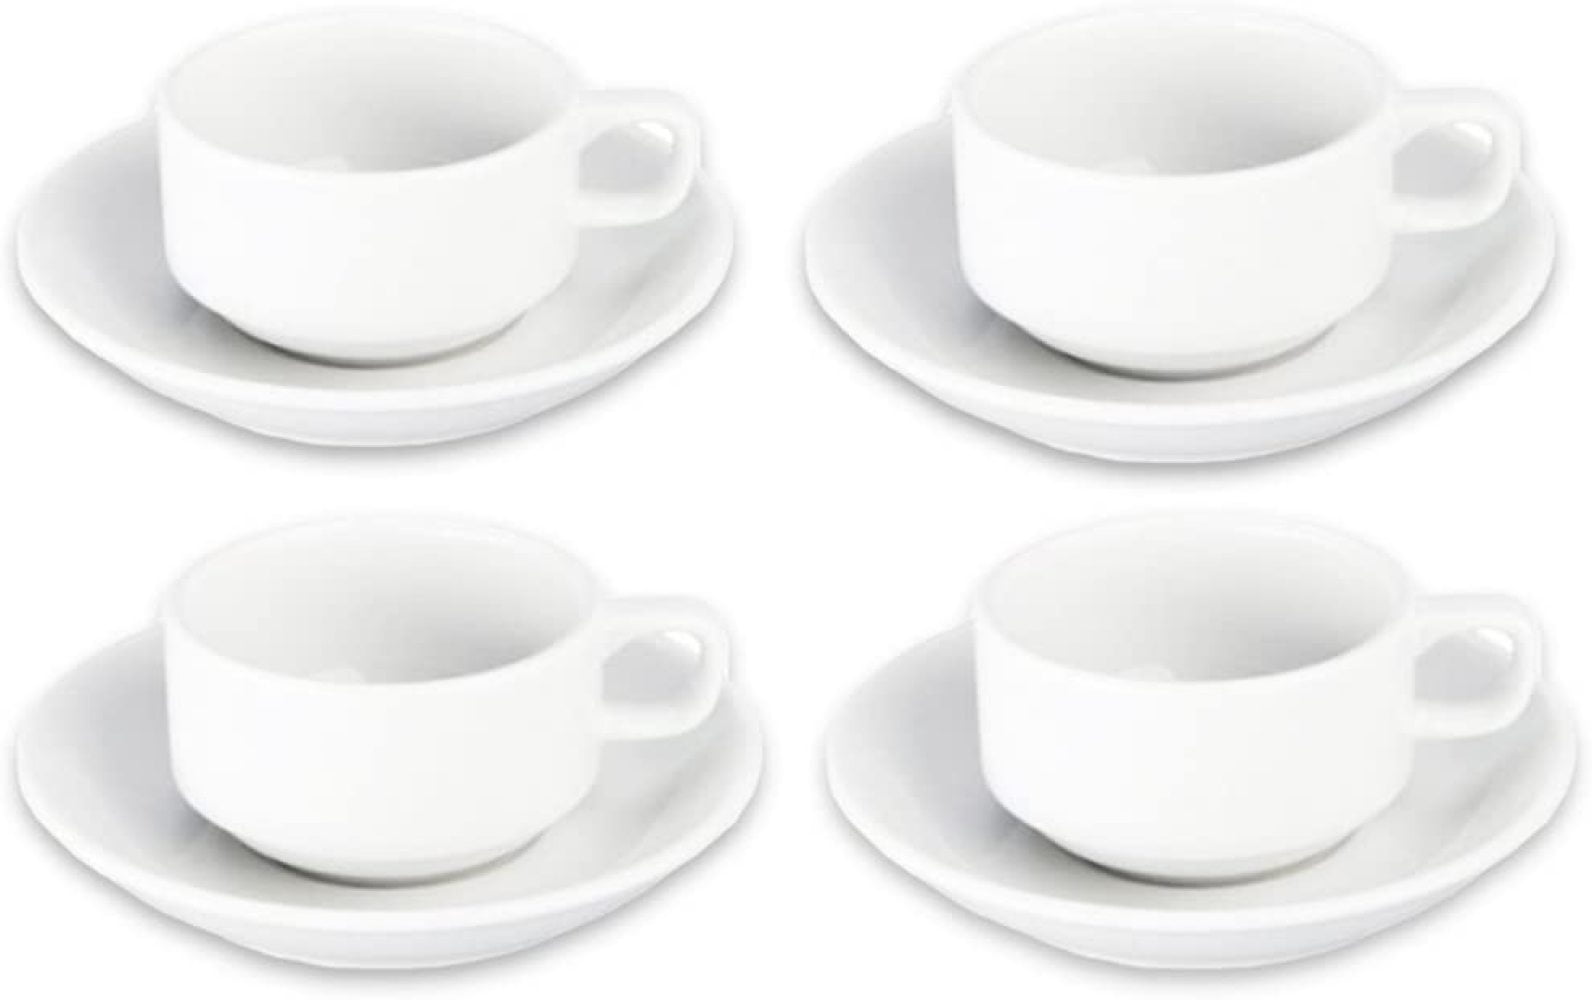 GRACE'S TEAWARE 8-PC Gift Box SET 4 ESPRESSO Mugs Small Coffee Cups & 4 Saucers 